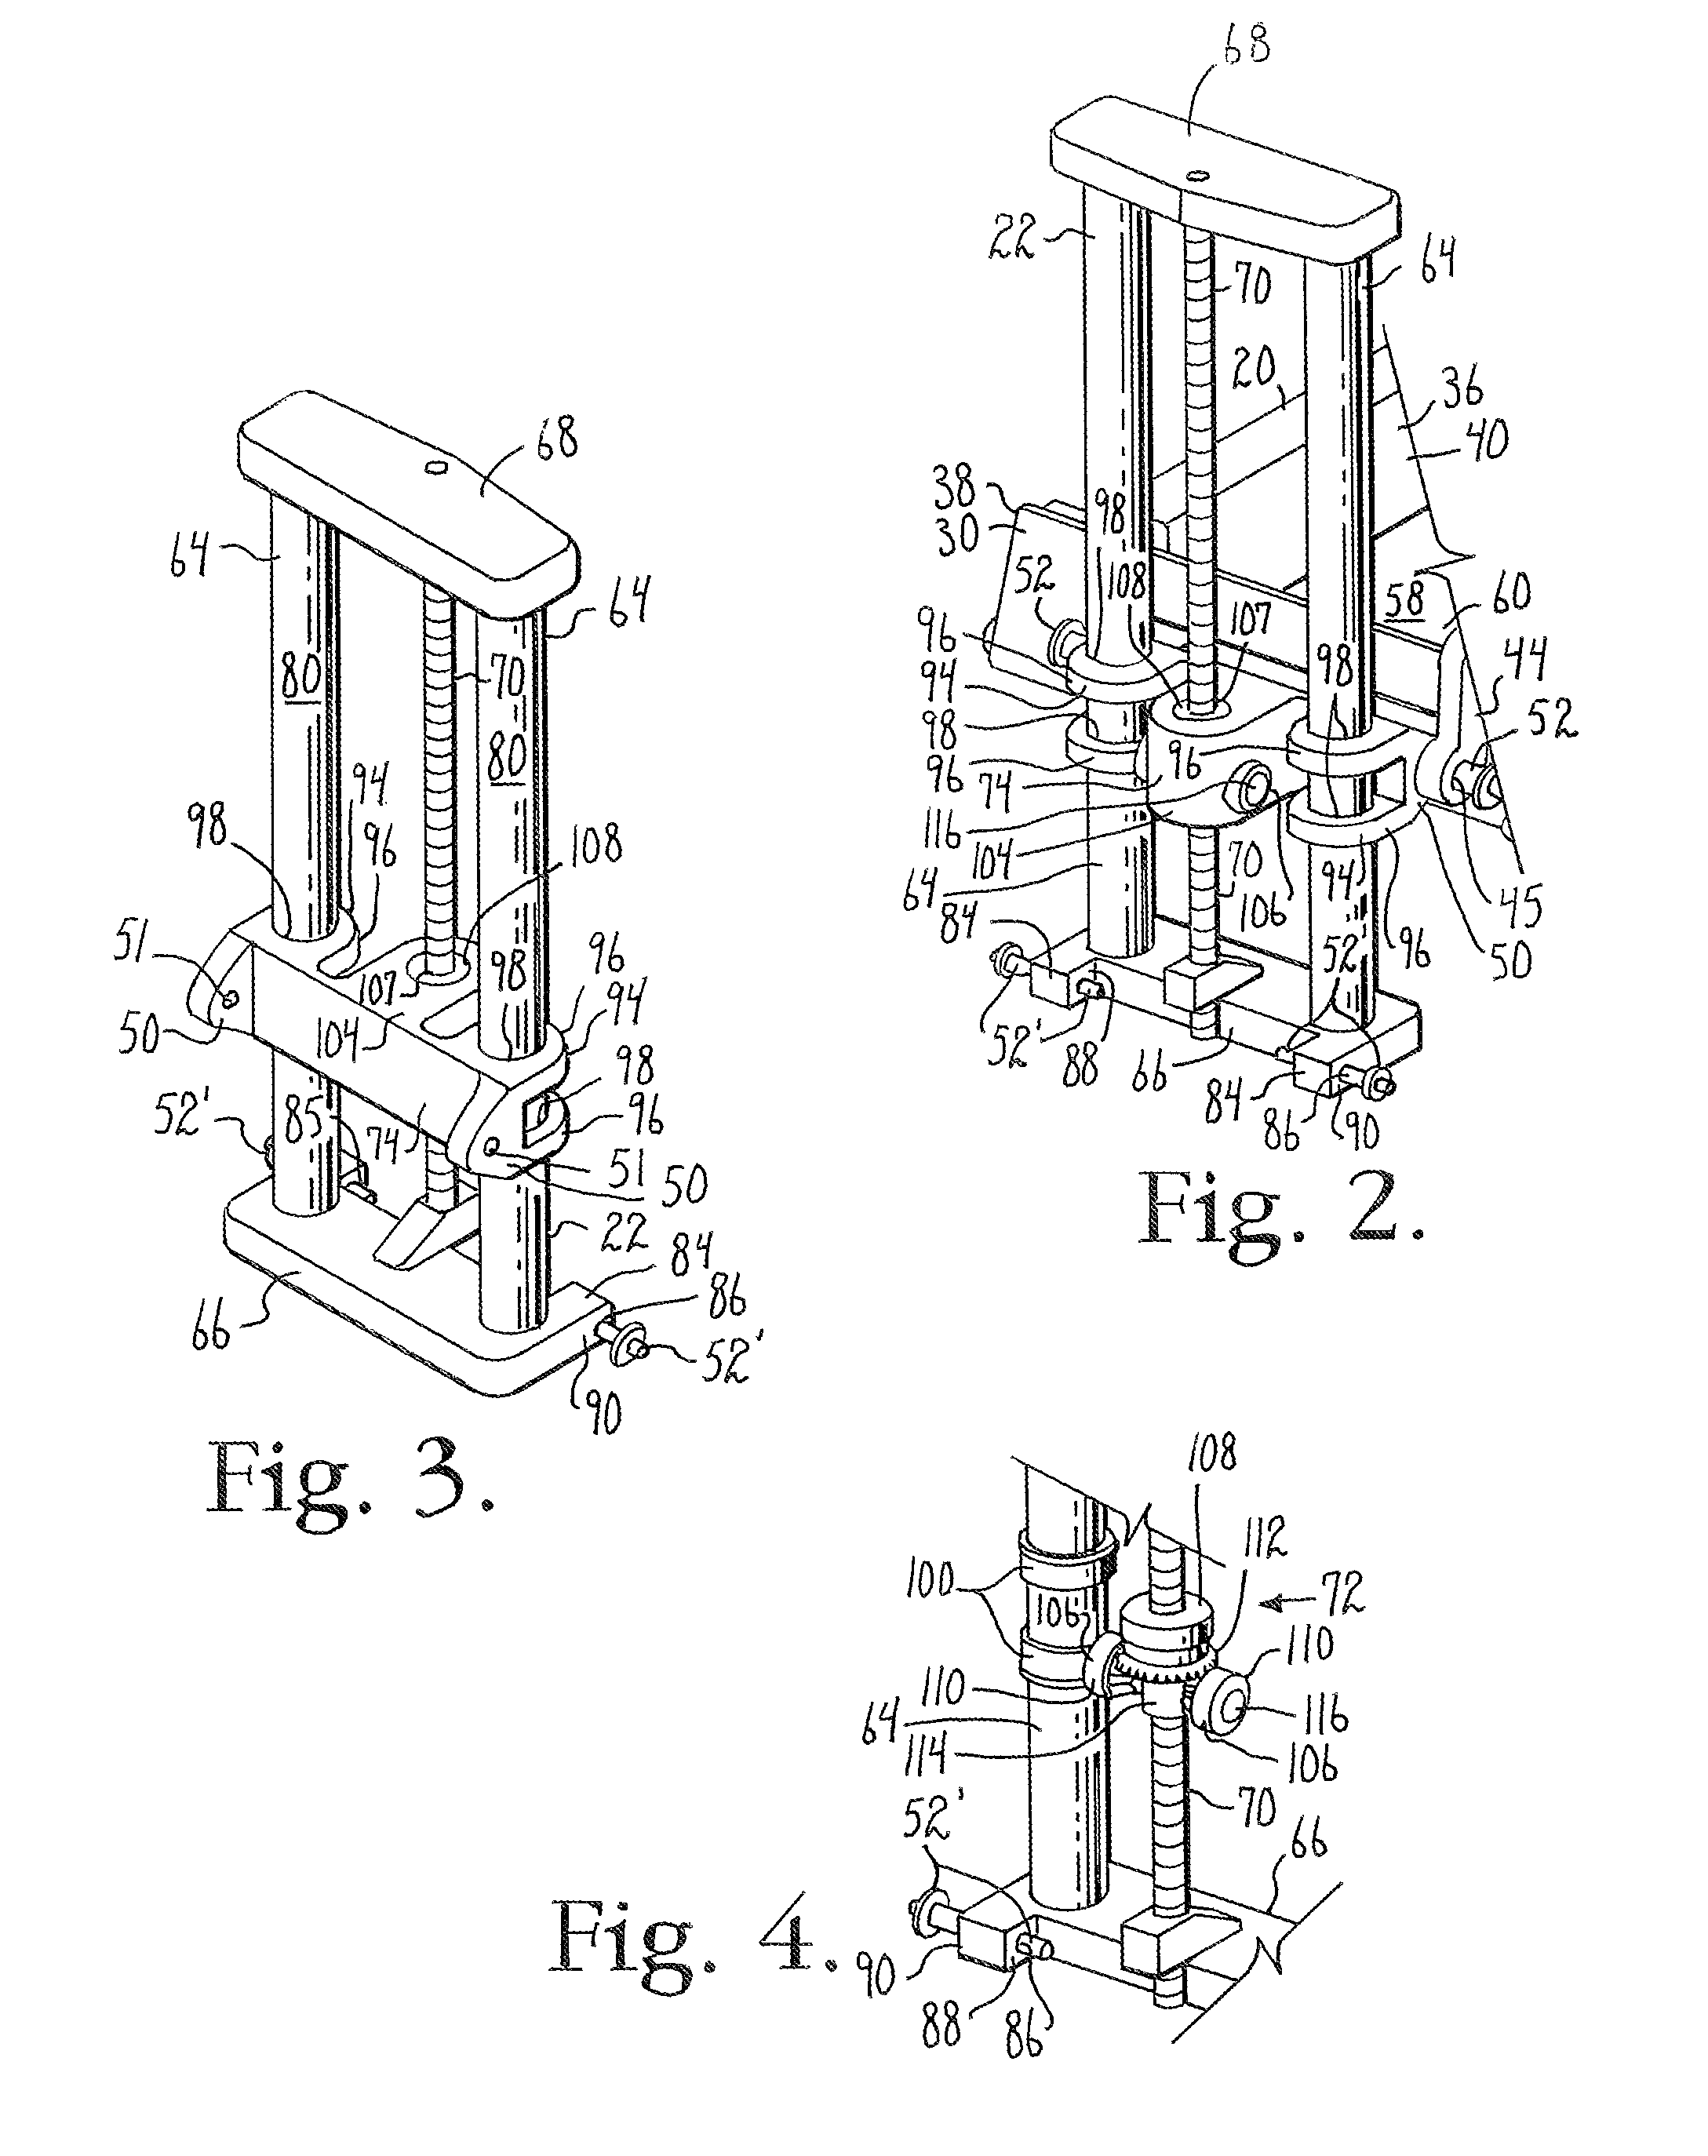 Syncronized patient elevation and positioning apparatus positioning support systems